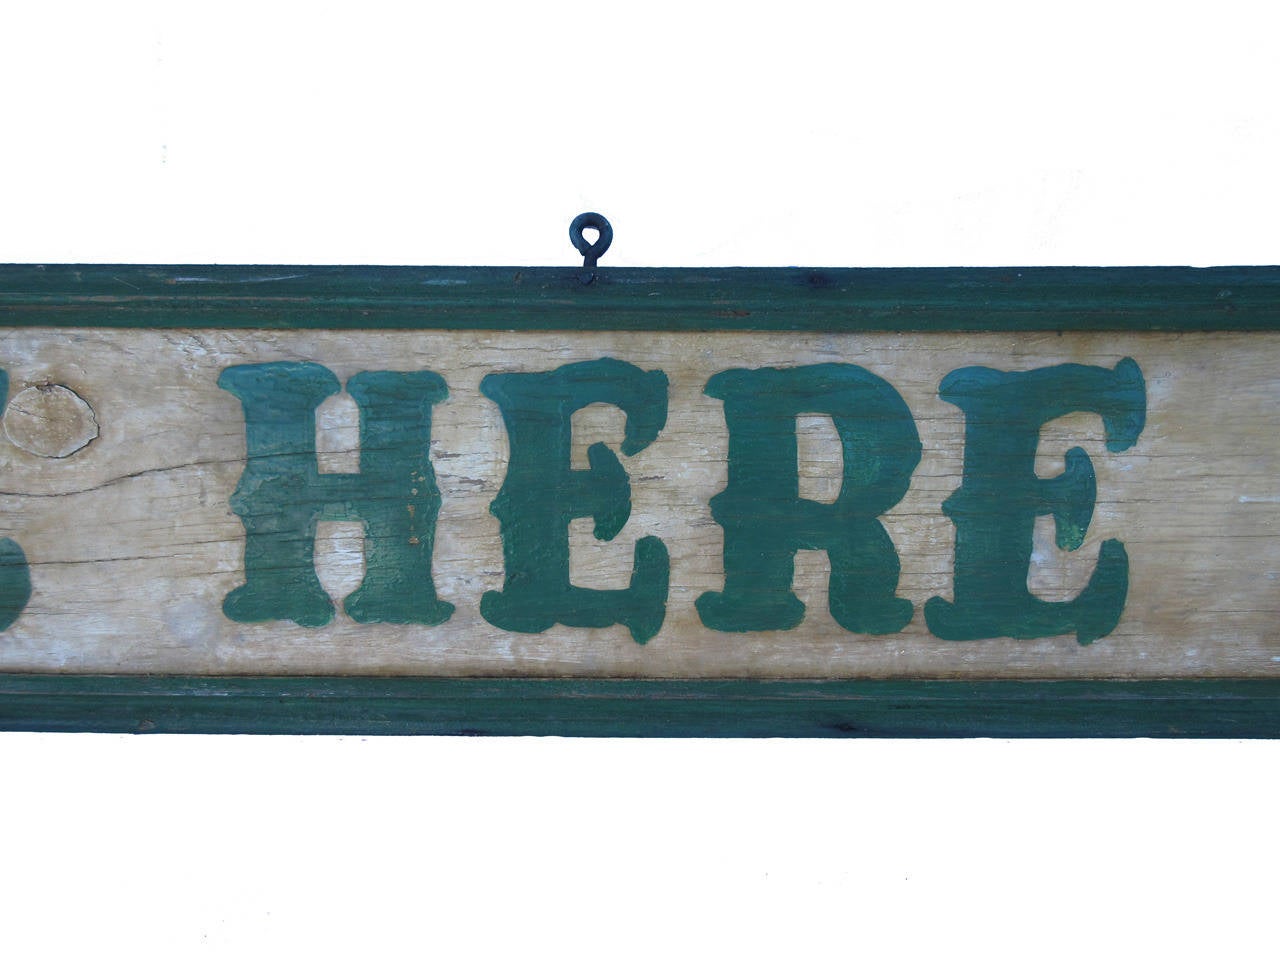 Exceptional handmade large-scale wood 'Ice Cream Made Here' sign in fancy and professional lettering on an ivory ground with a green wood border surround, great age cracked painted surface, original condition, Atlantic City boardwalk origin, circa